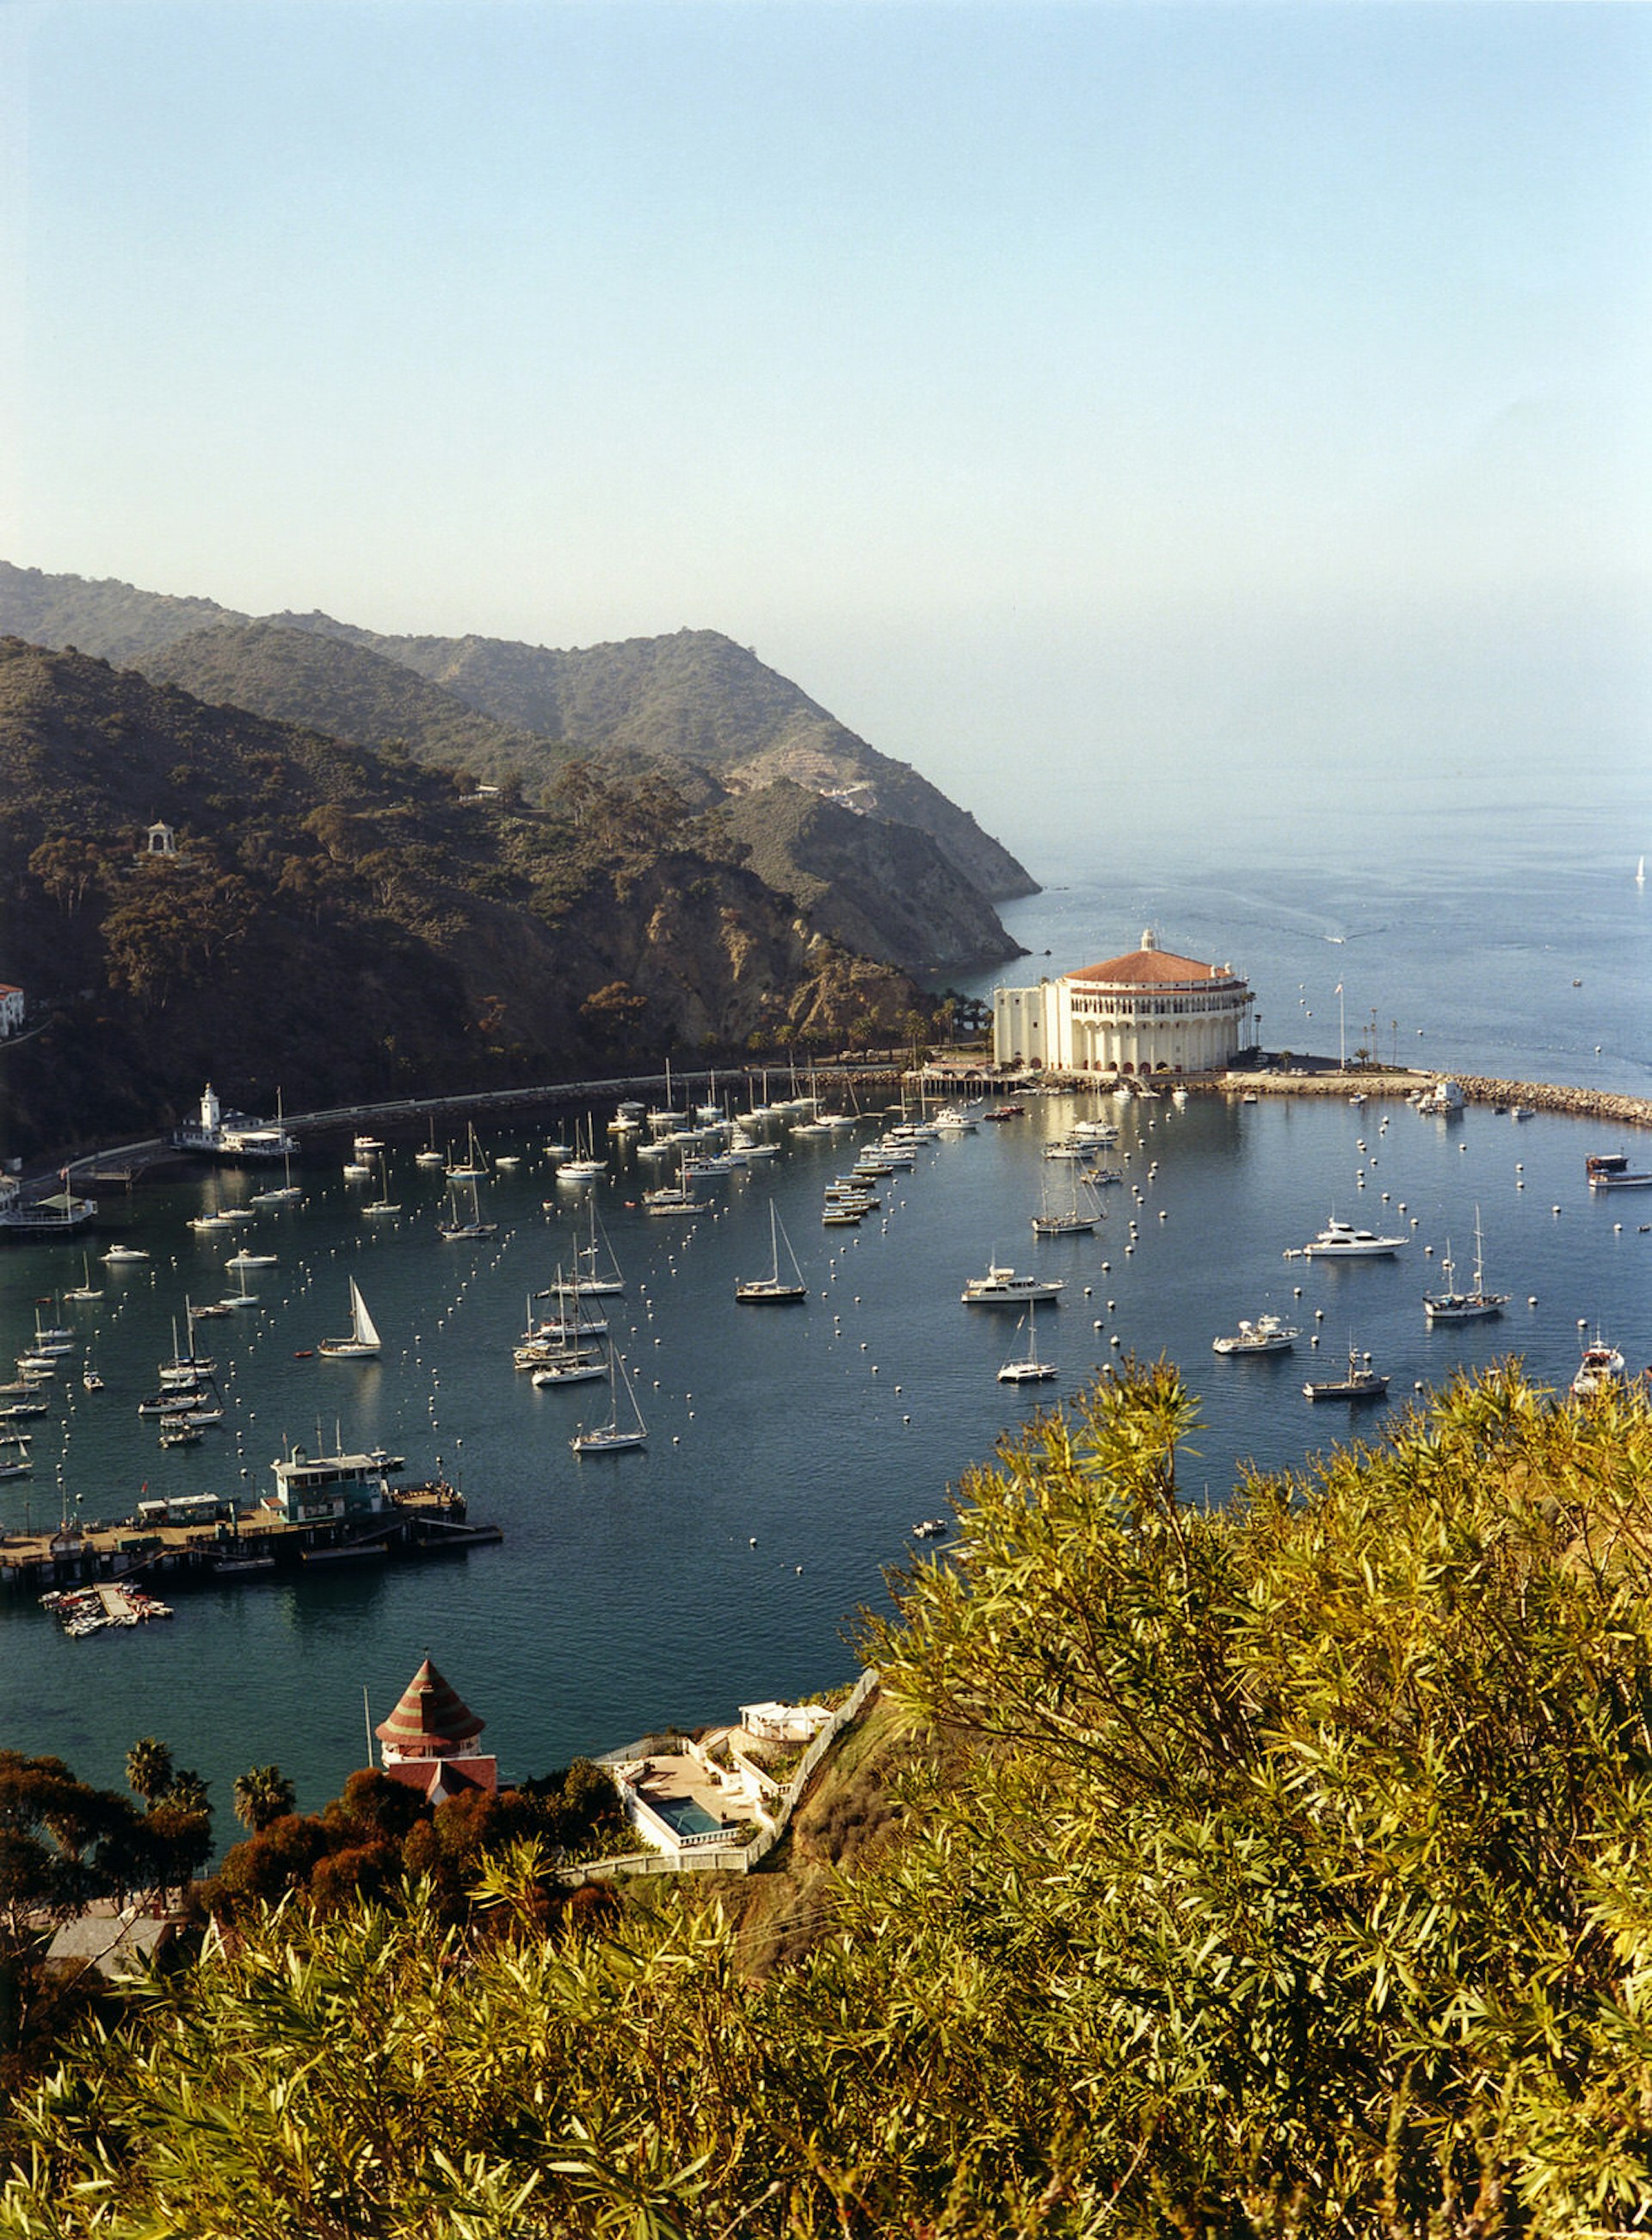 A view from high above the crescent-shaped Avalon Harbor on Catalina Island, in California, and looking out to the sea.